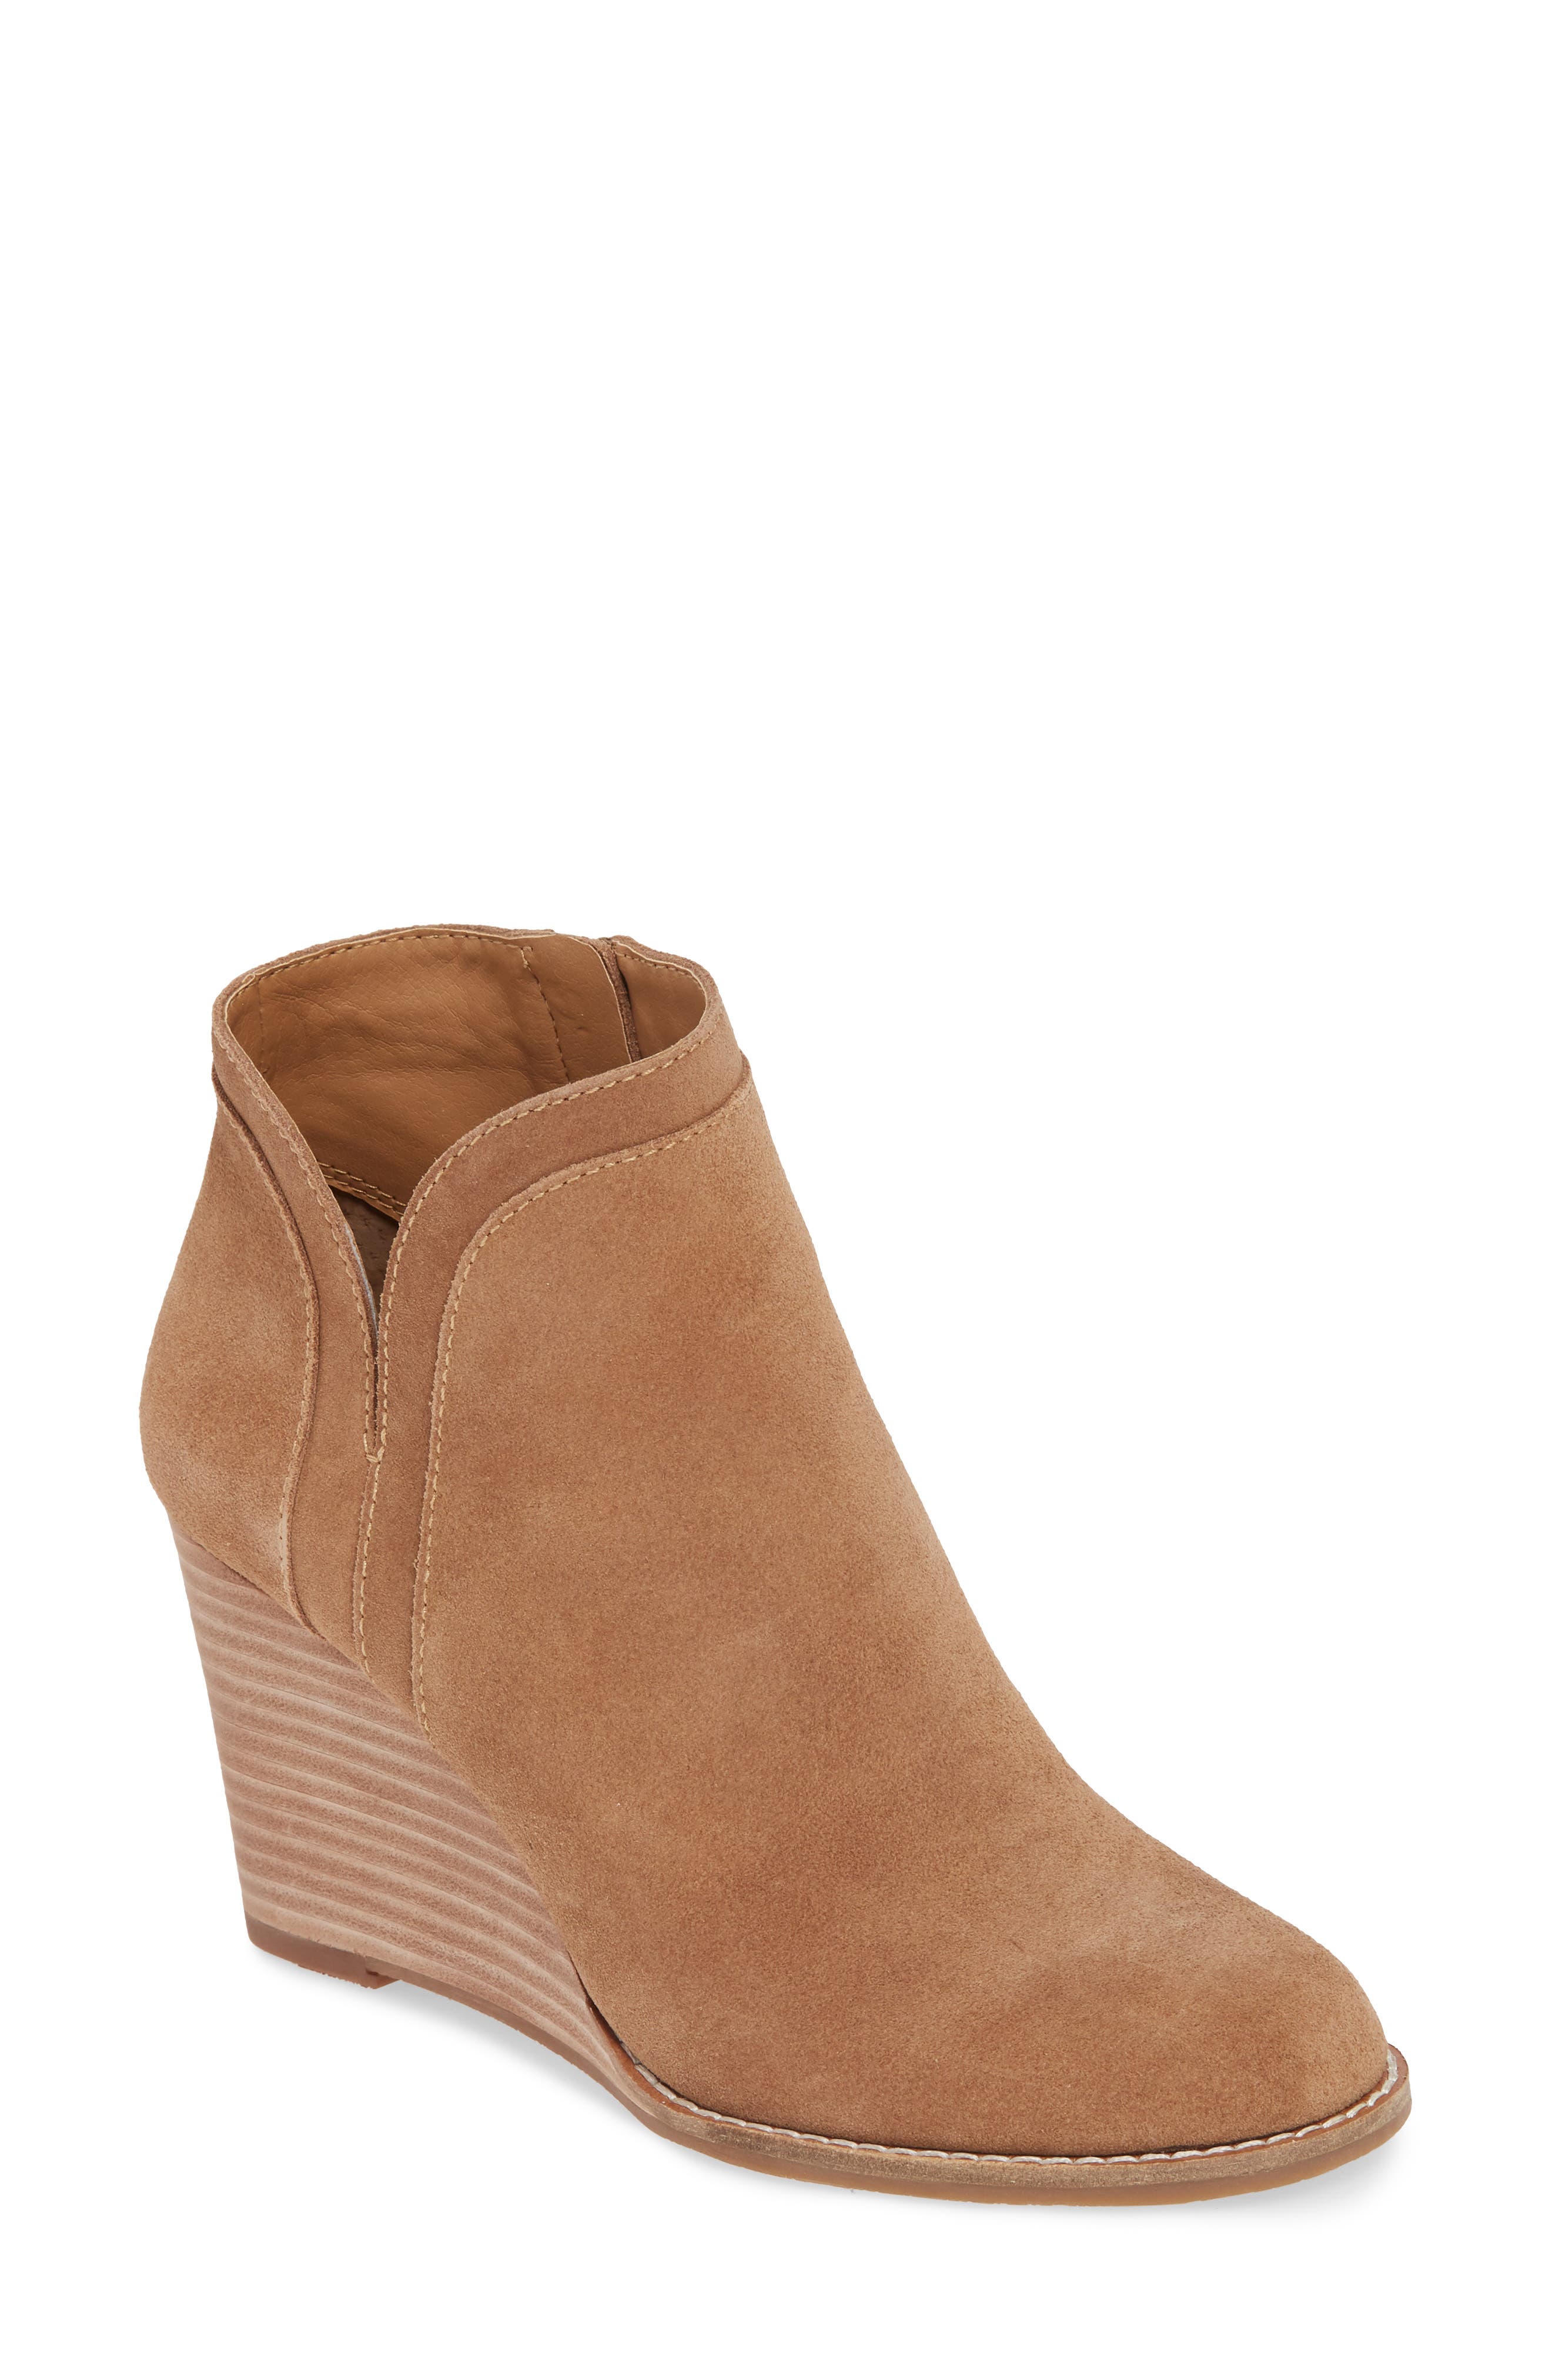 lucky brand yimmie wedge bootie